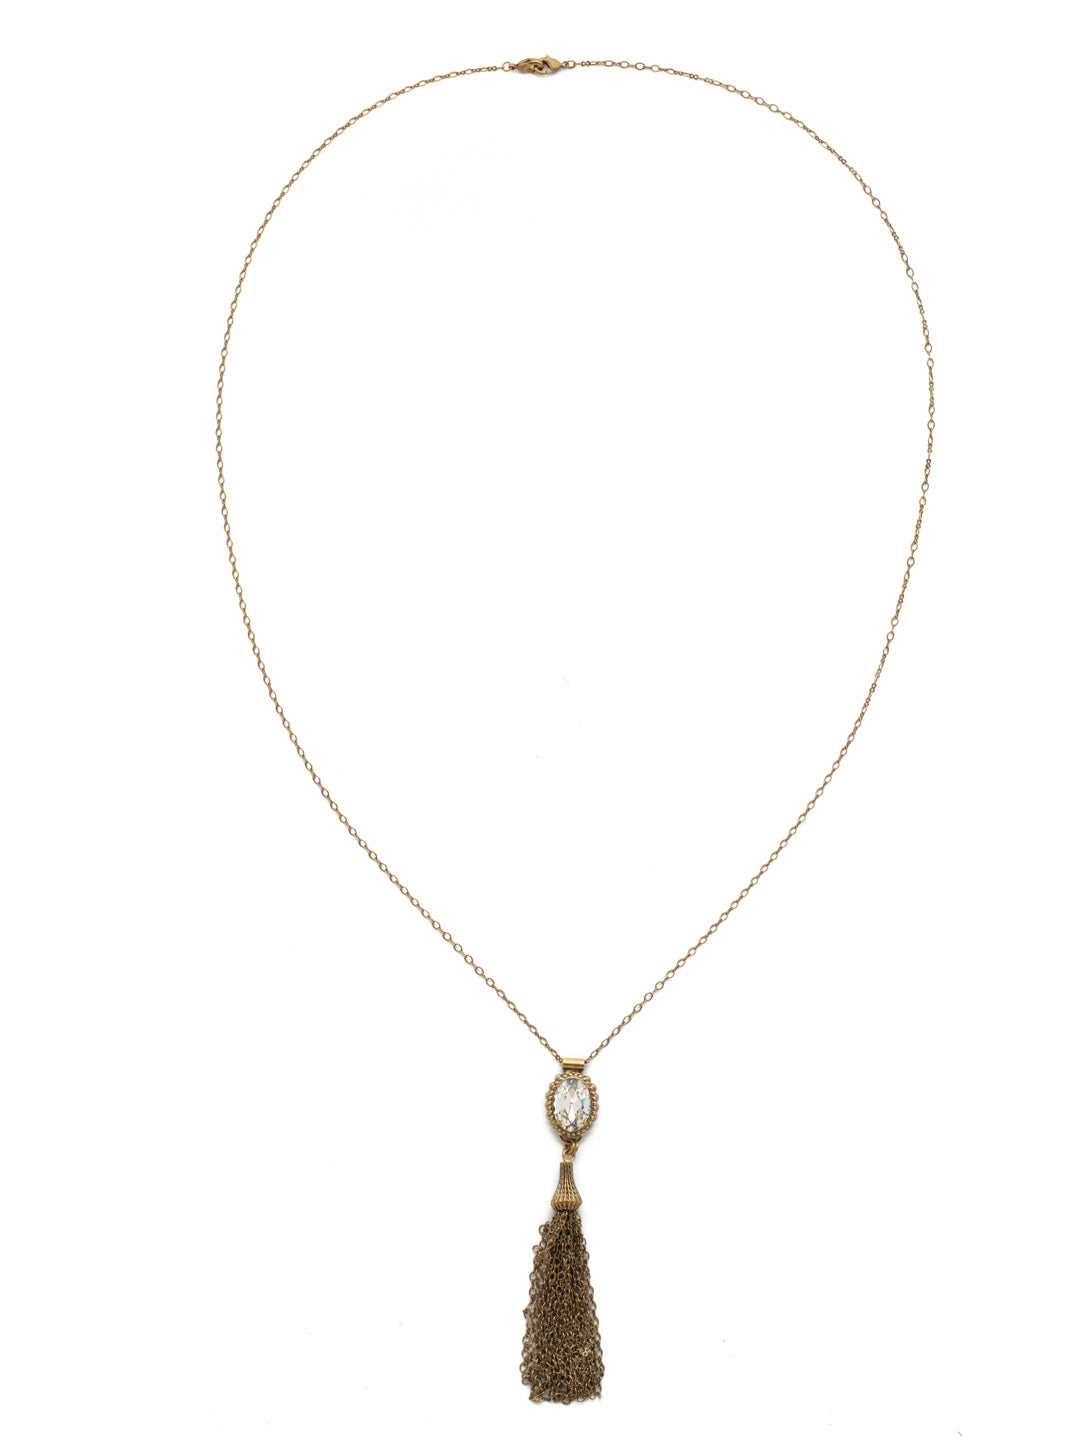 Camellia Tassle Necklace - NDQ9AGCRY - <p>A delicate oval crystal surrounded by a decorative metal border is the perfect piece for those who want to be trend-right this season. From Sorrelli's Crystal collection in our Antique Gold-tone finish.</p>